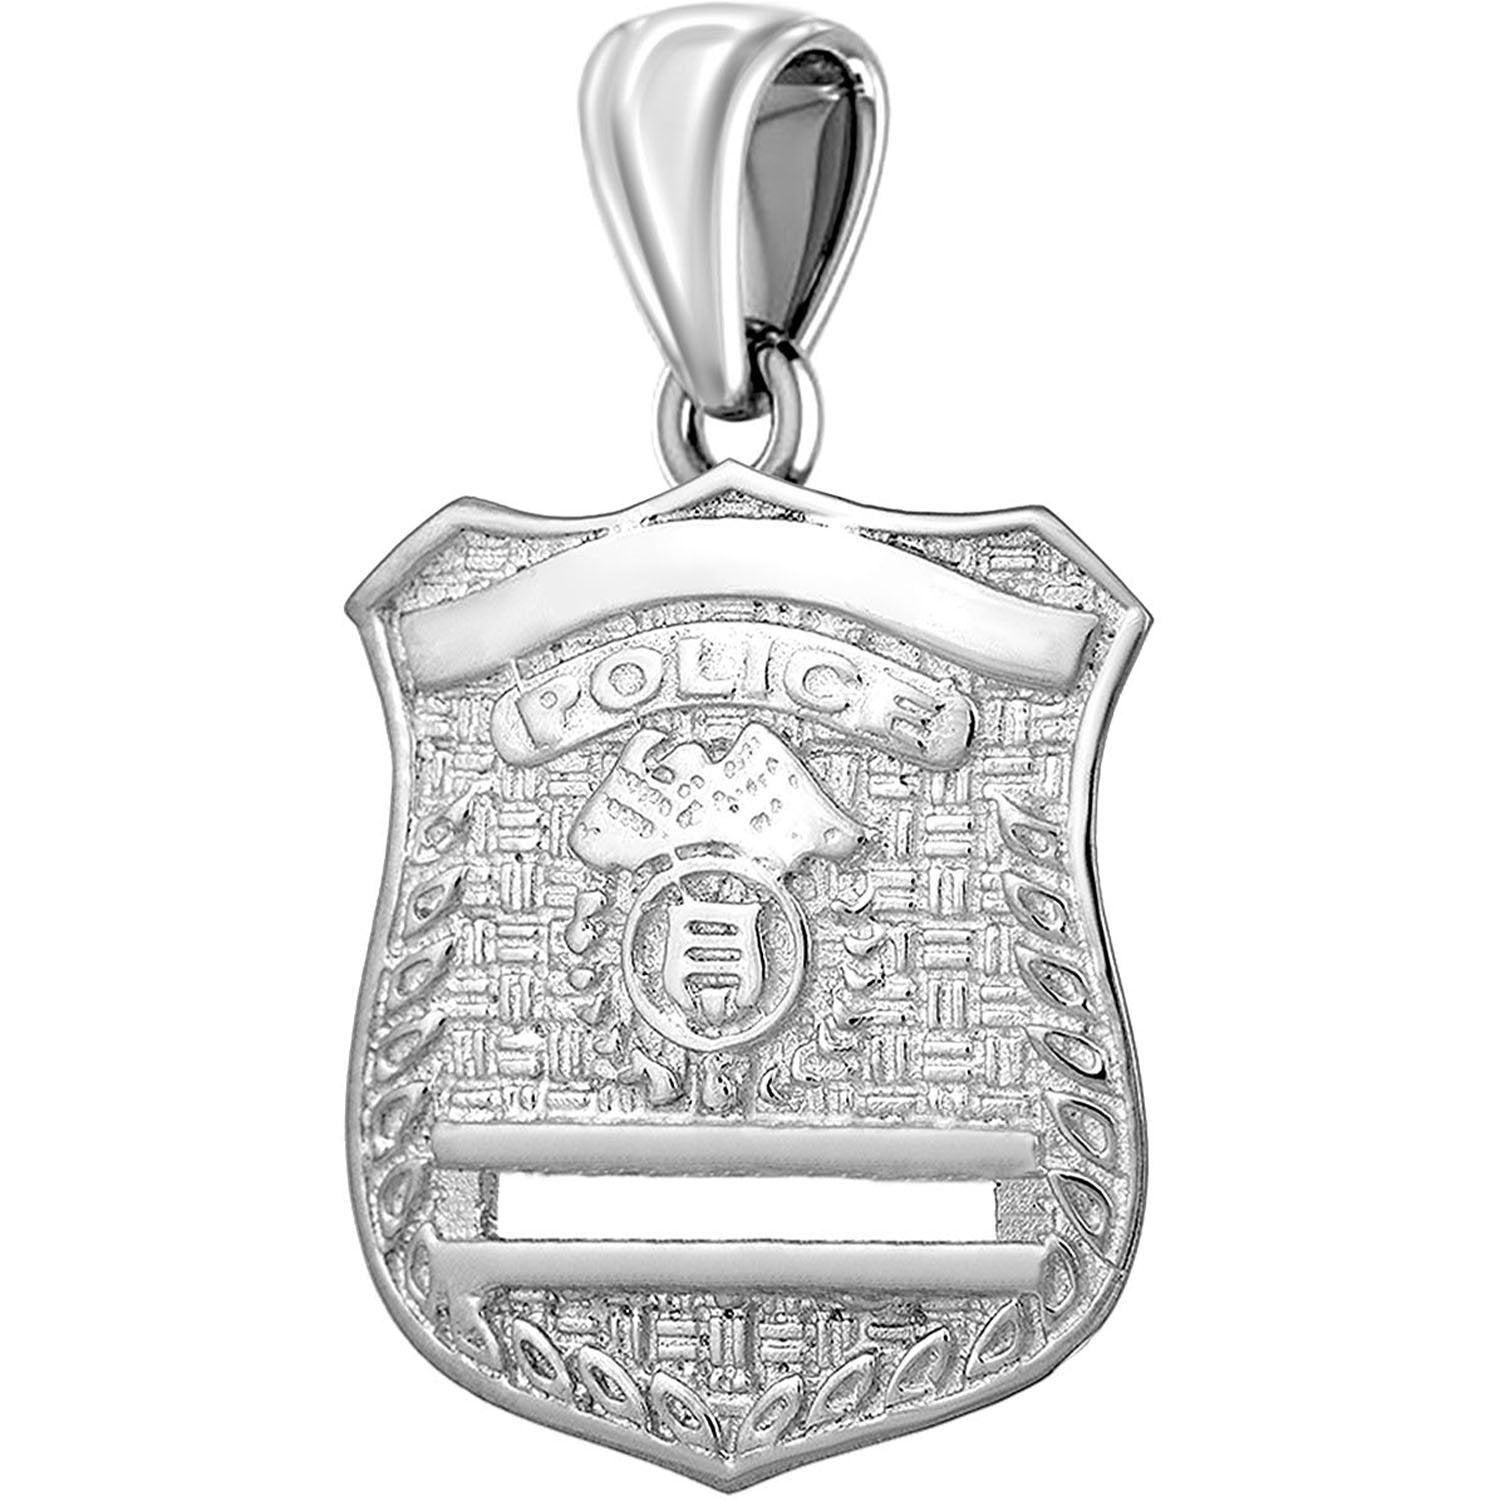 Police Badge Necklace In Silver - Pendant Only